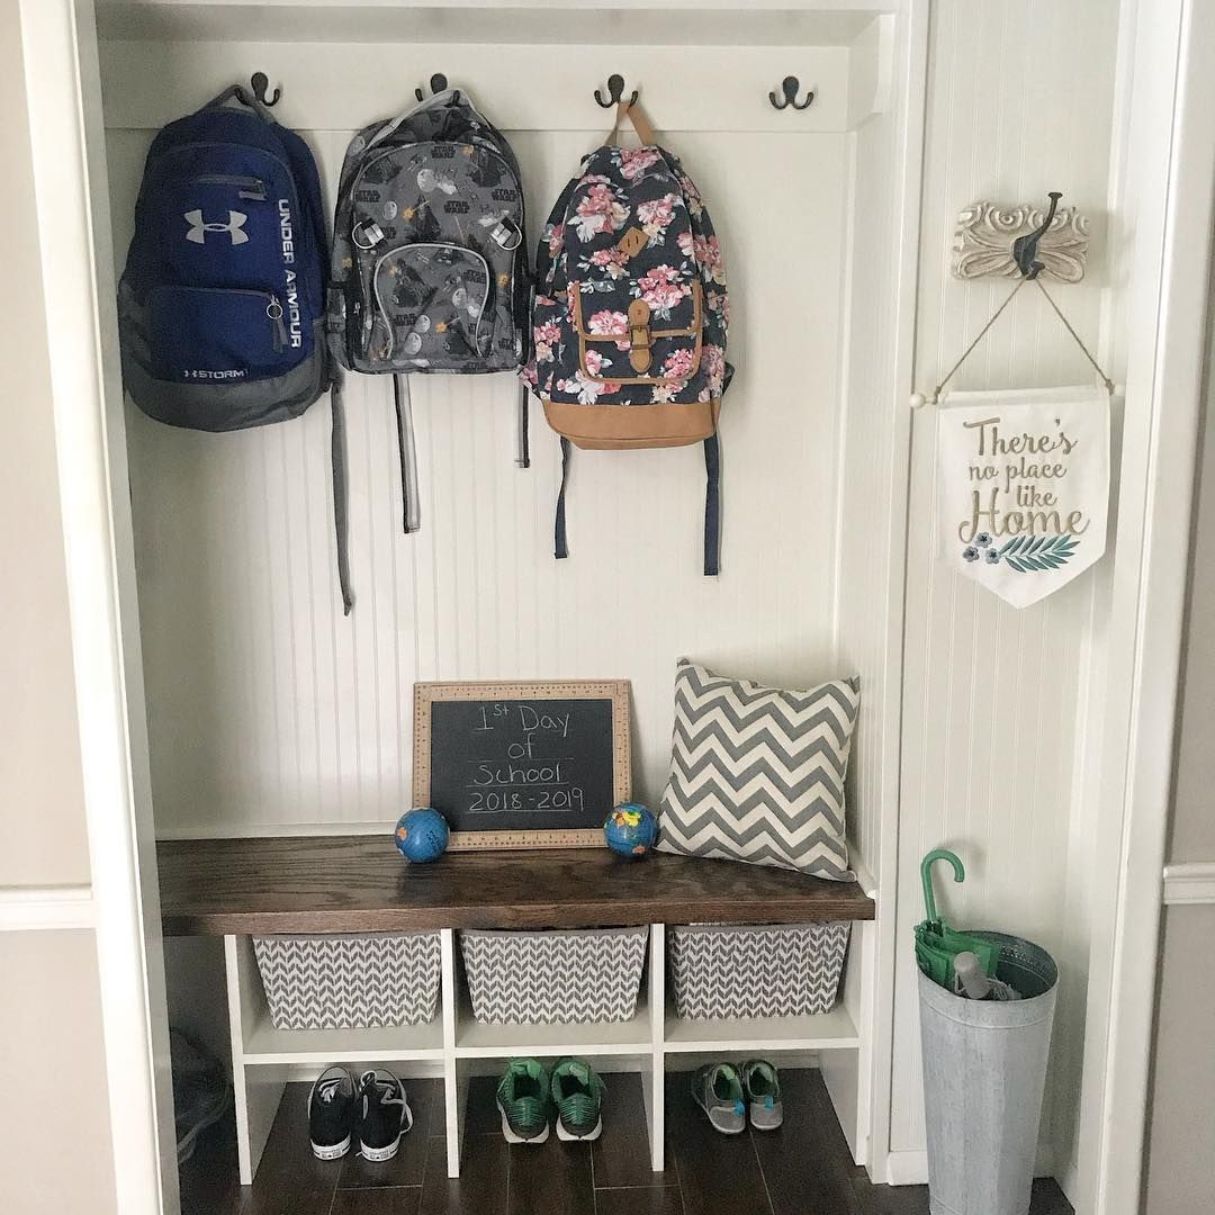 How To Store Backpacks In Closet